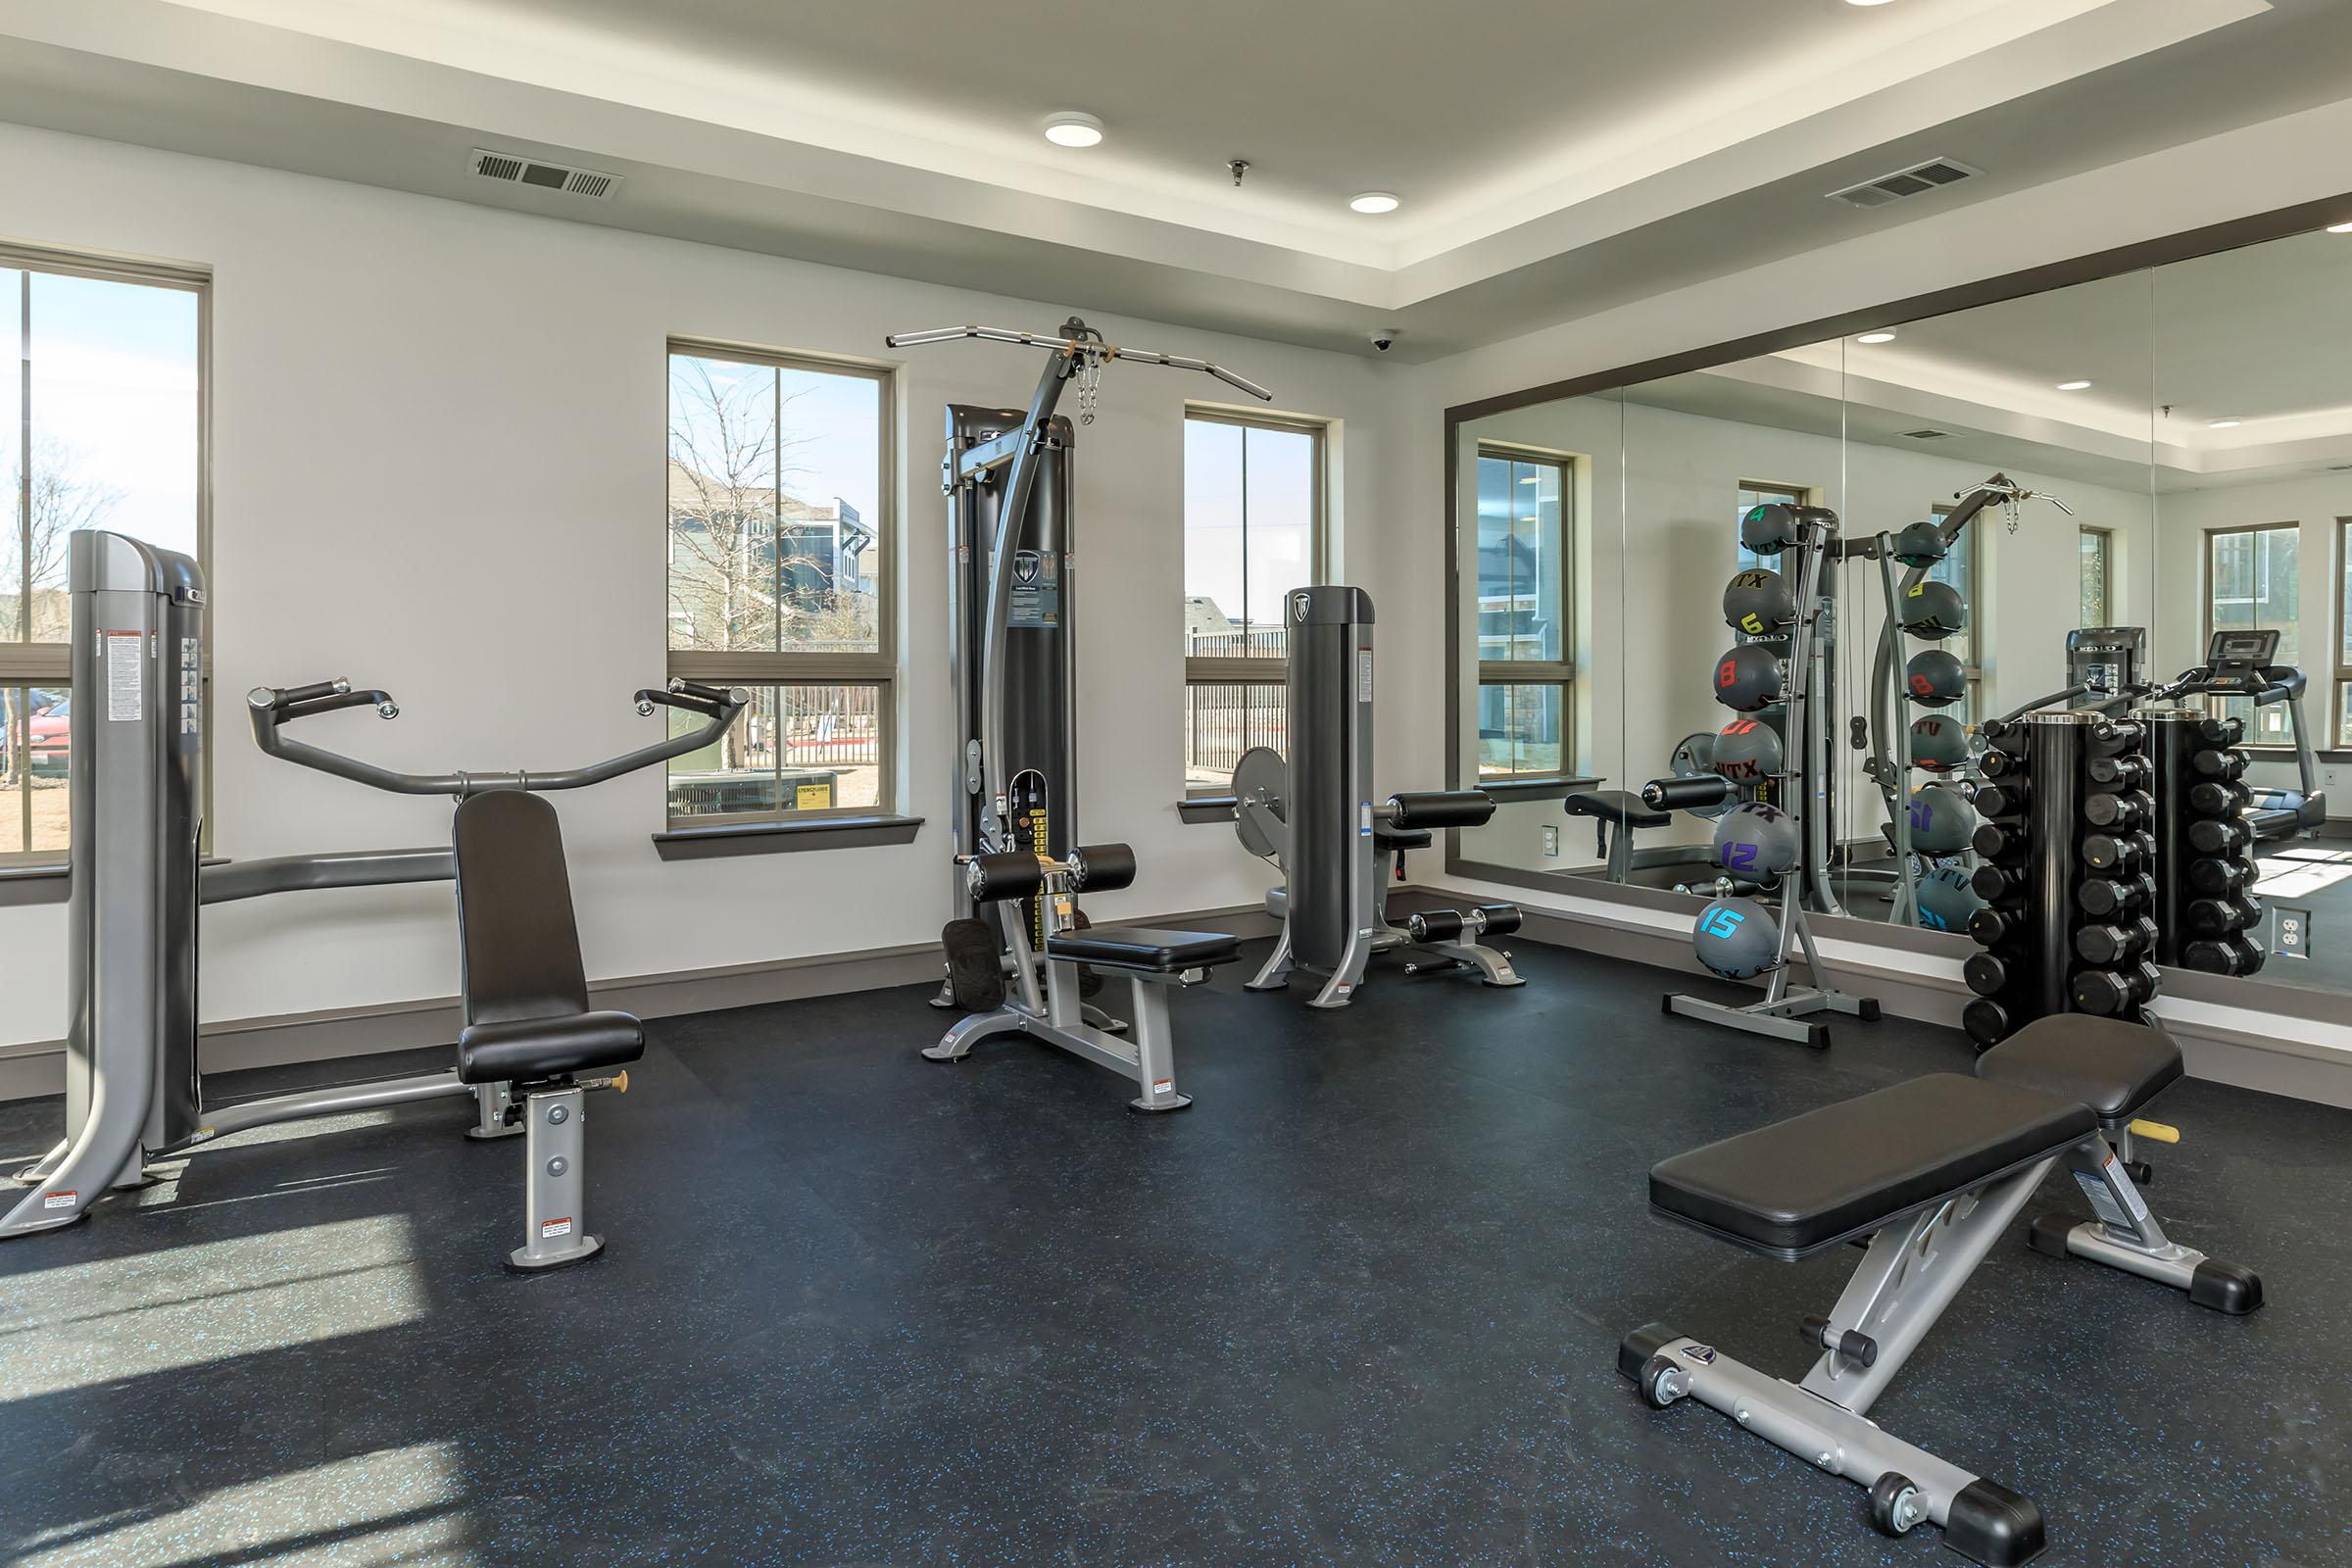 WORKOUT ANYTIME IN THE FITNESS CENTER